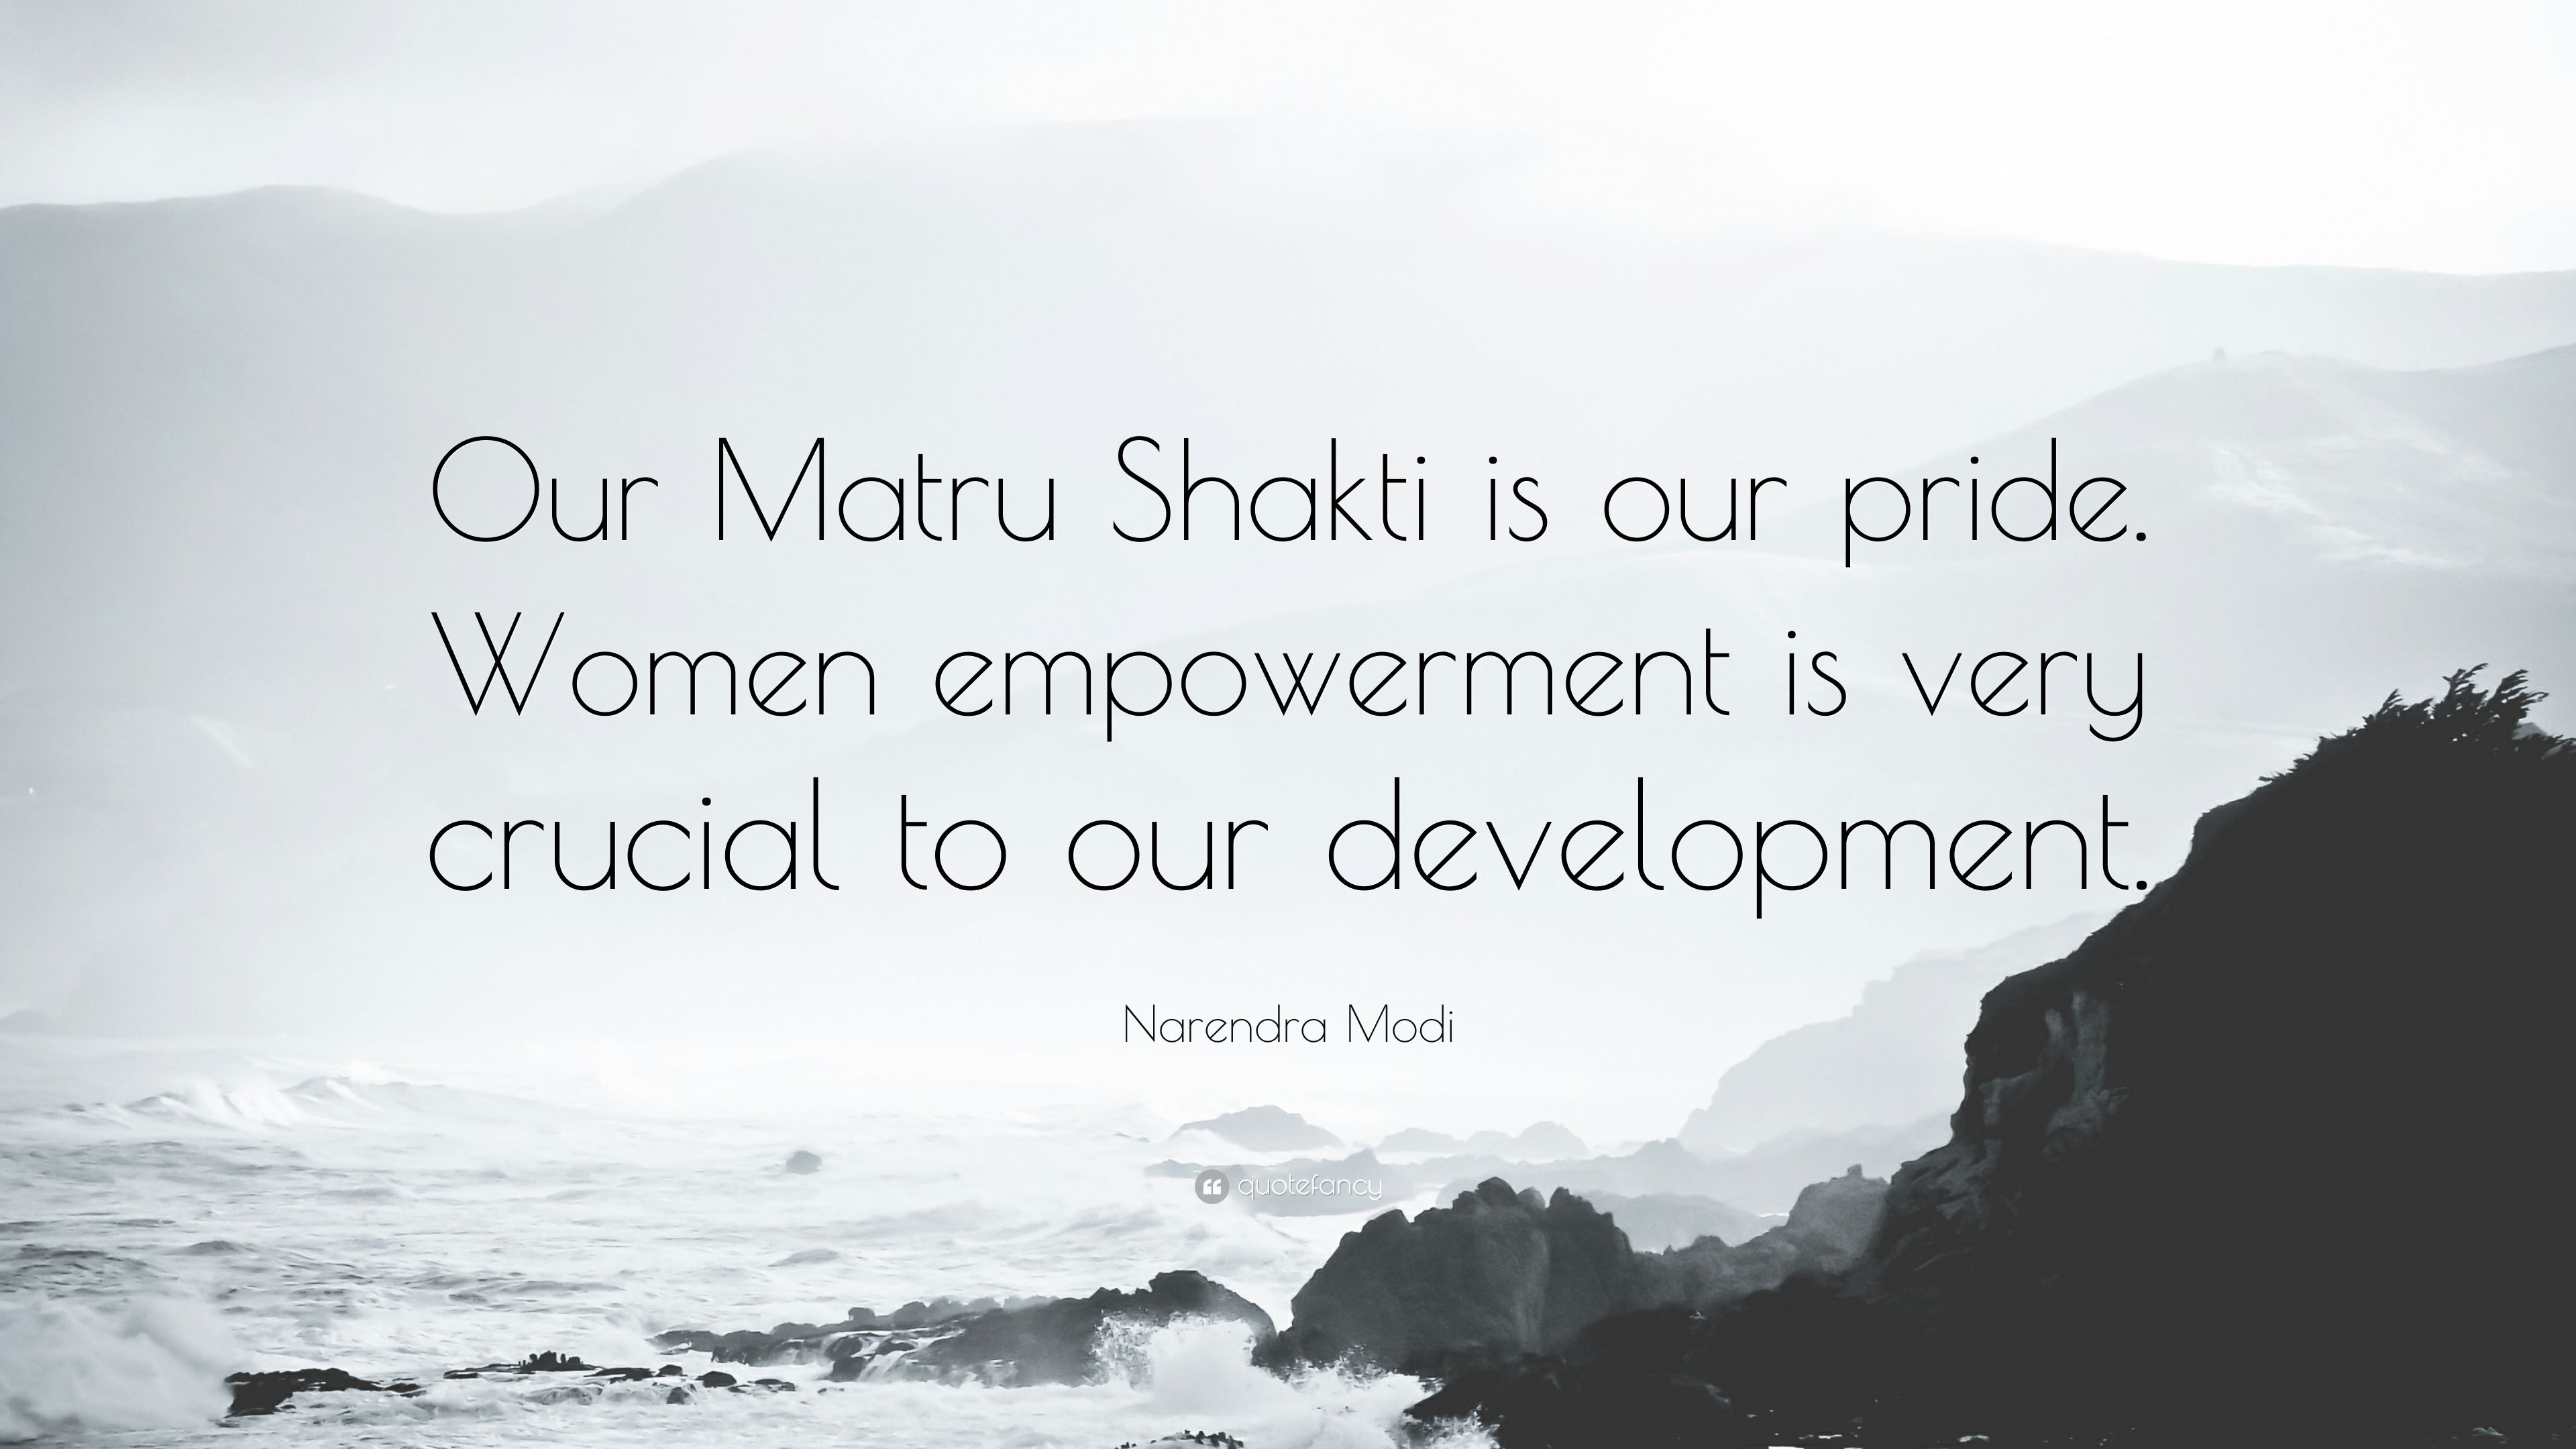 Narendra Modi Quote: “Our Matru Shakti is our pride. Women empowerment is very crucial to our development.” (12 wallpaper)